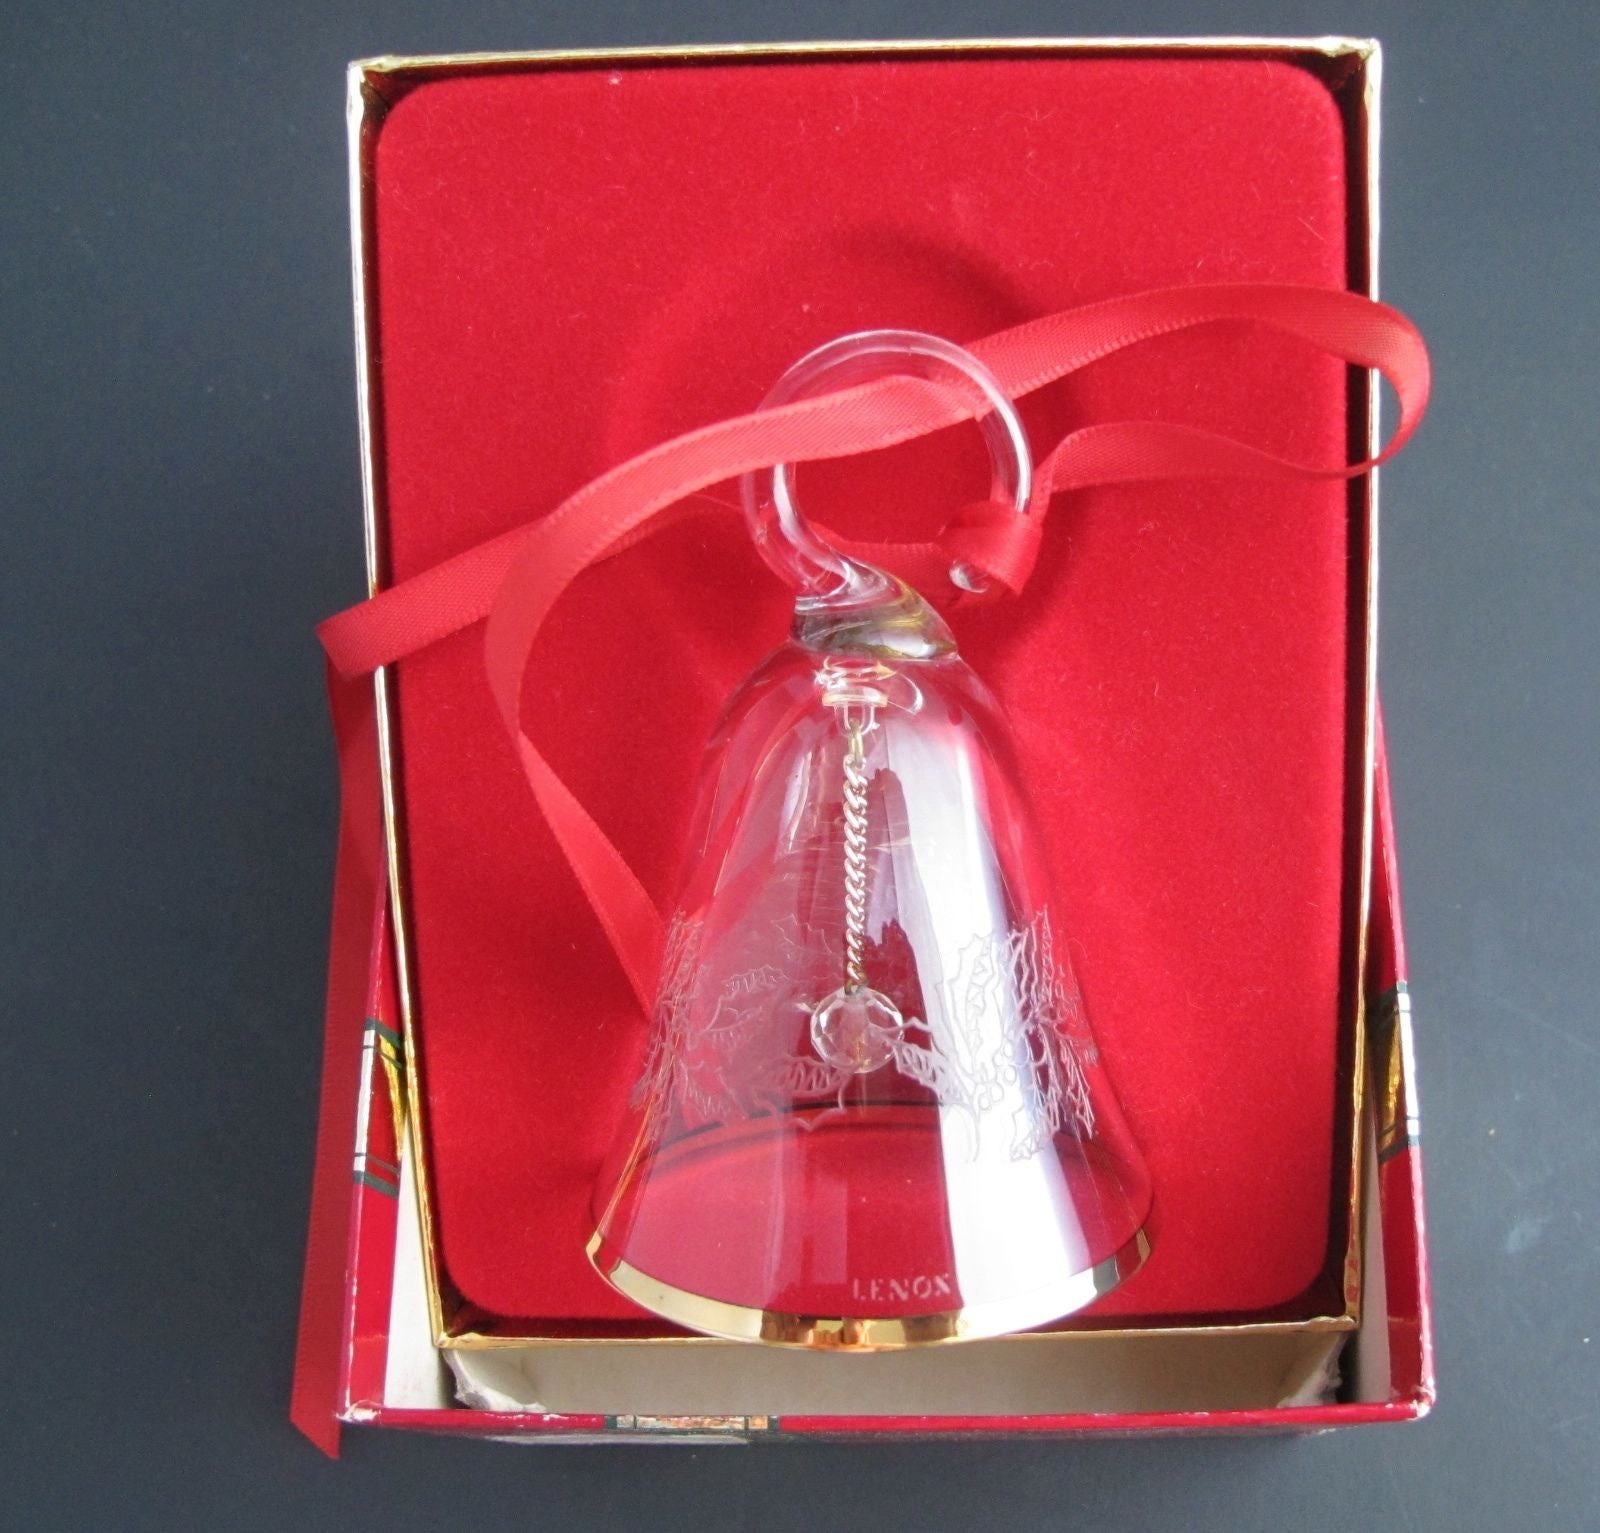 Lenox Crystal 1985 Holly  miniature bell ornament Hand blown Made in USA - O'Rourke crystal awards & gifts abp cut glass